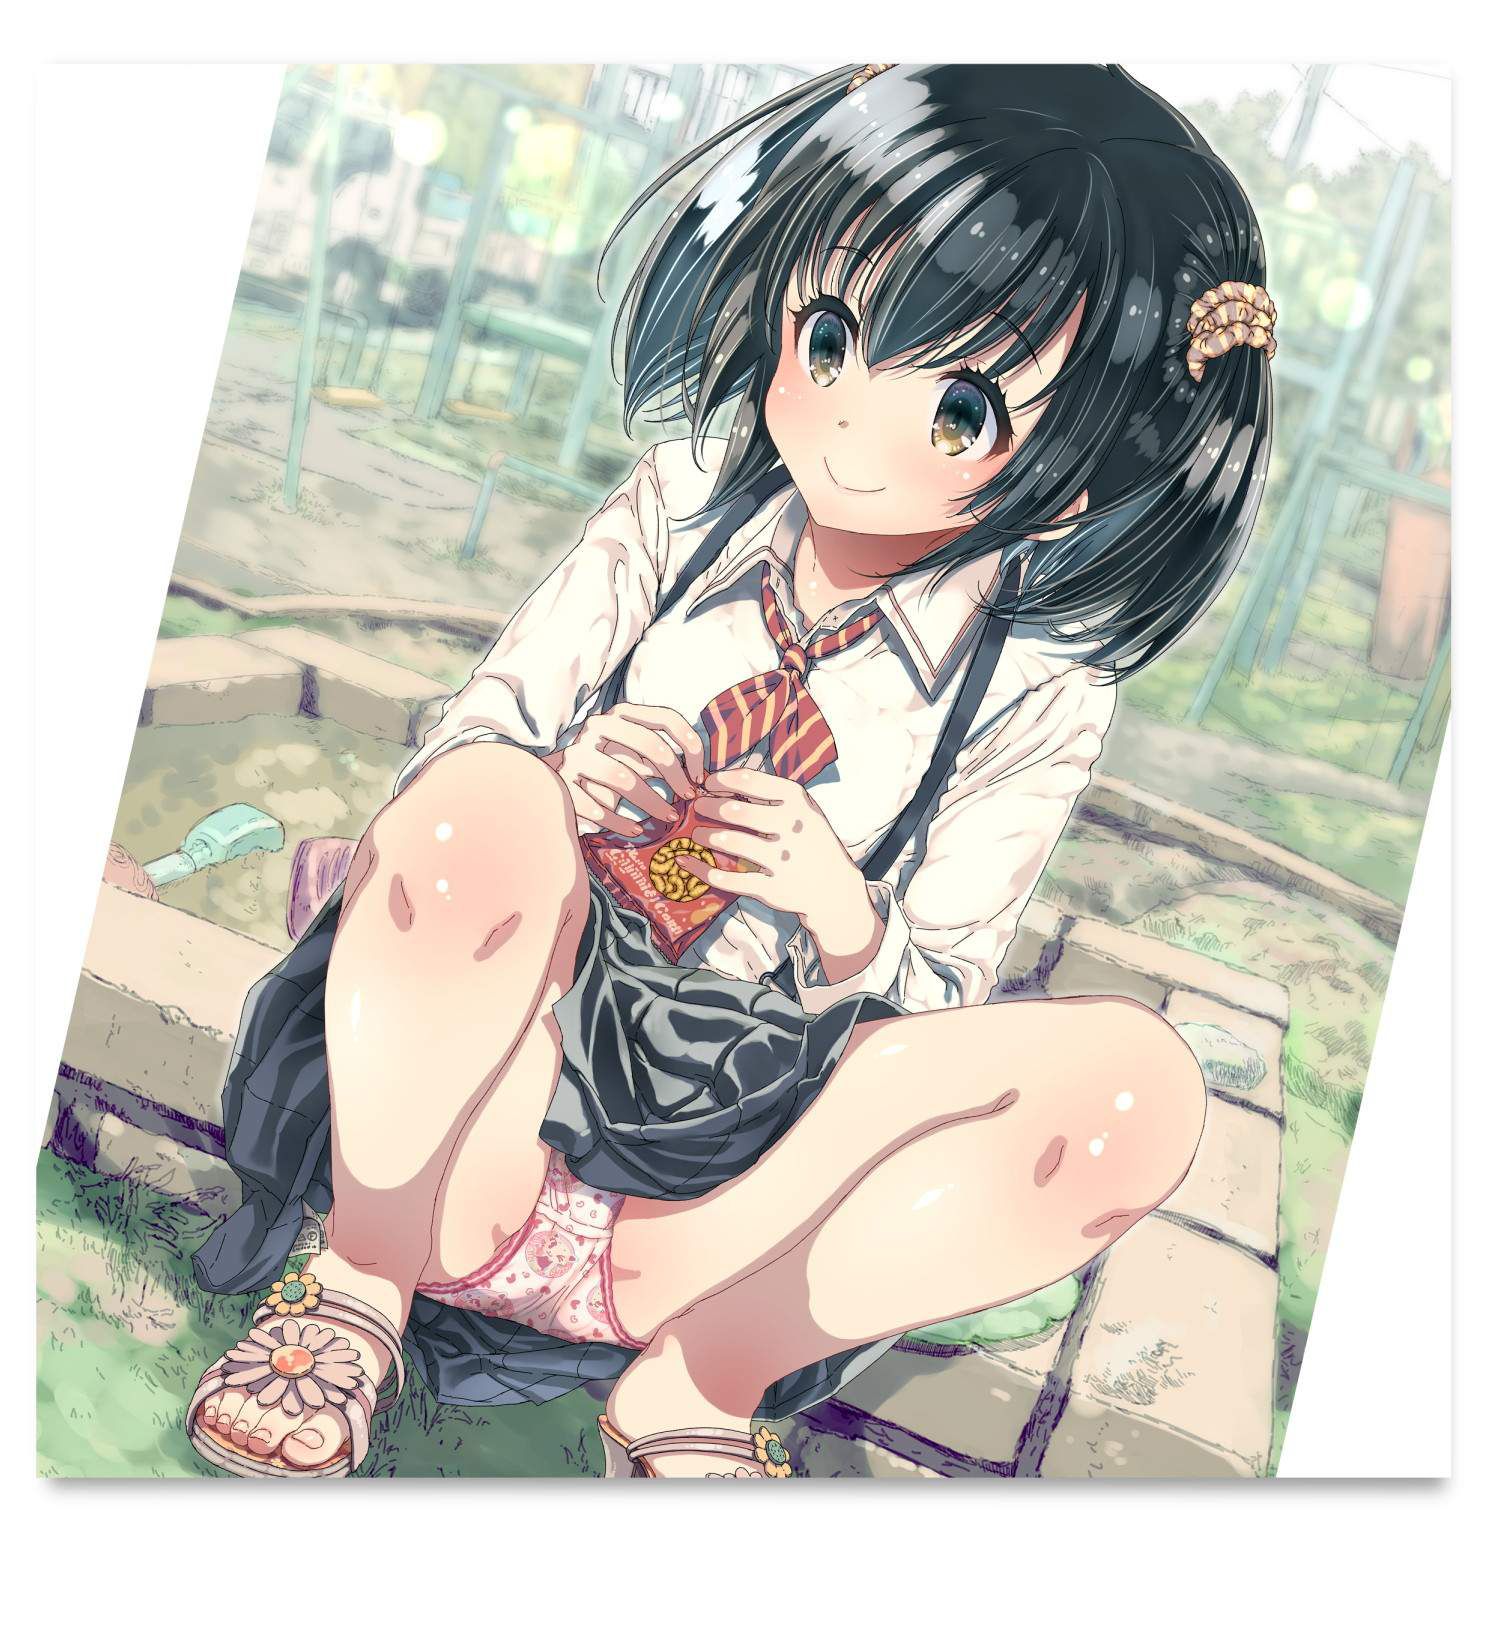 "Where are you looking~?" A soft-looking defenseless crotch image ♪ of a girl squatting with her eyes 12